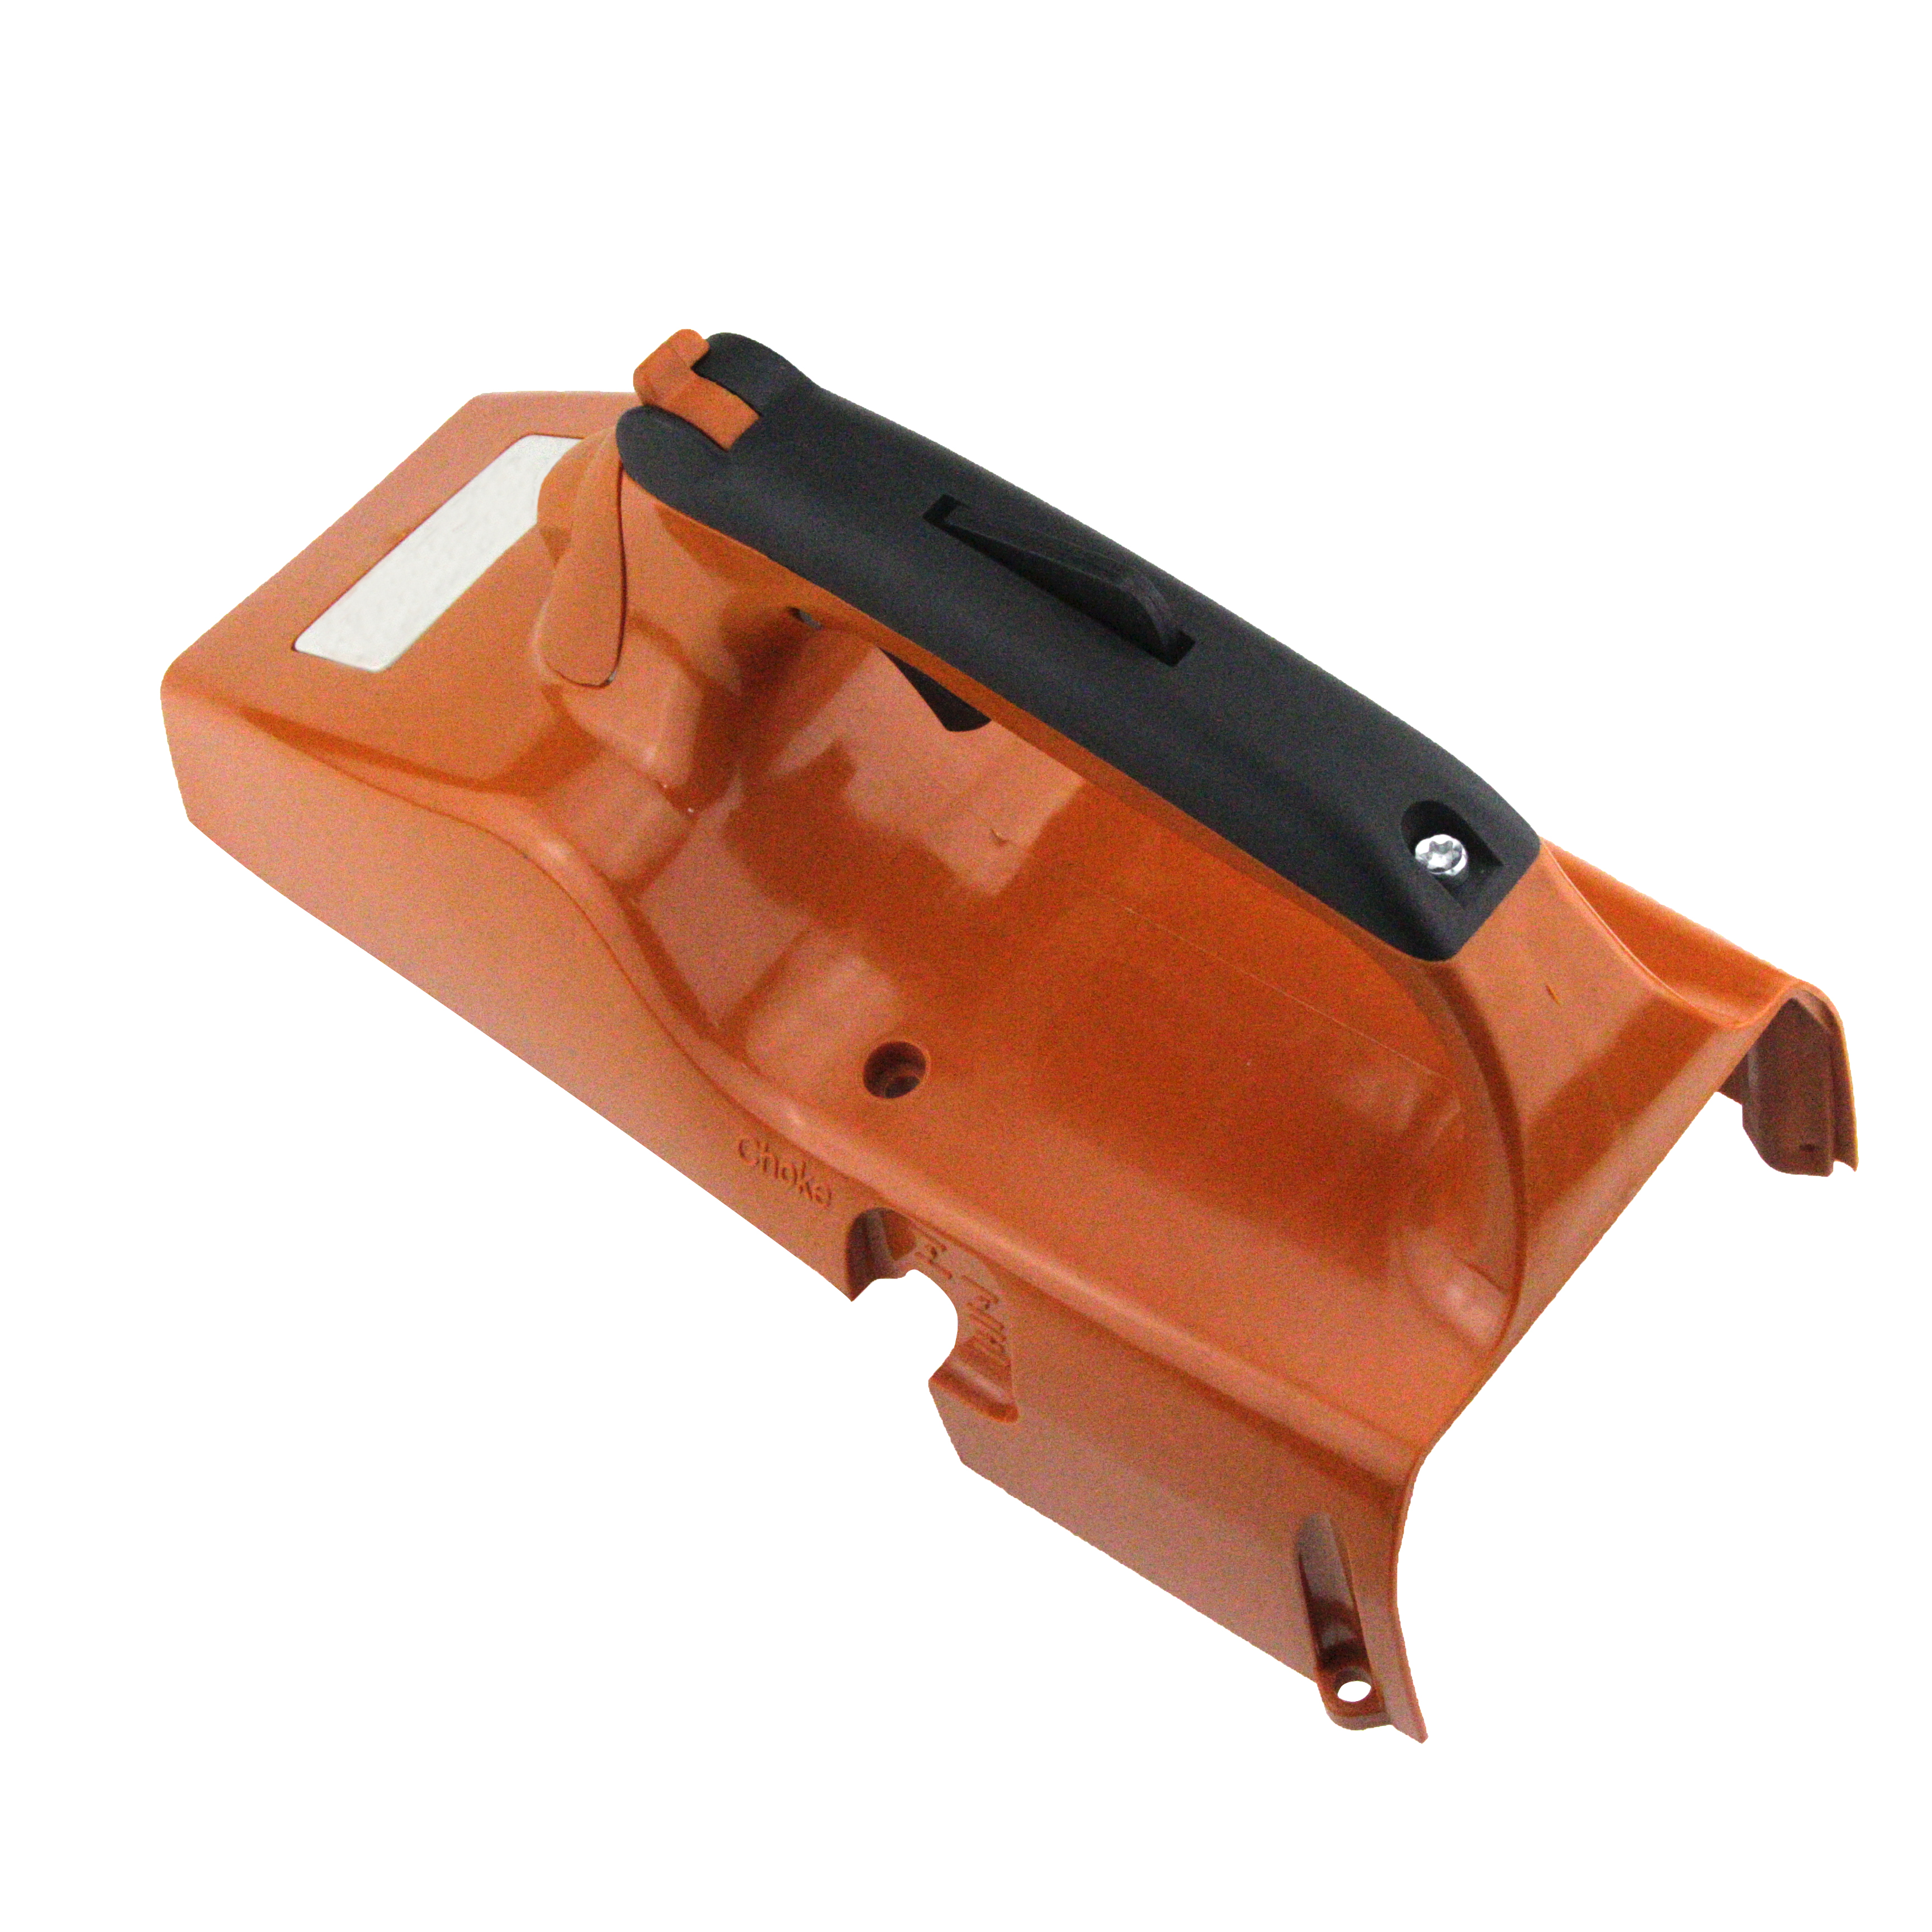 Top Shroud Cover For Stihl TS400 Concrete Cut Off Saw 4223 080 1605 With Handle Moulding Grommet Assy